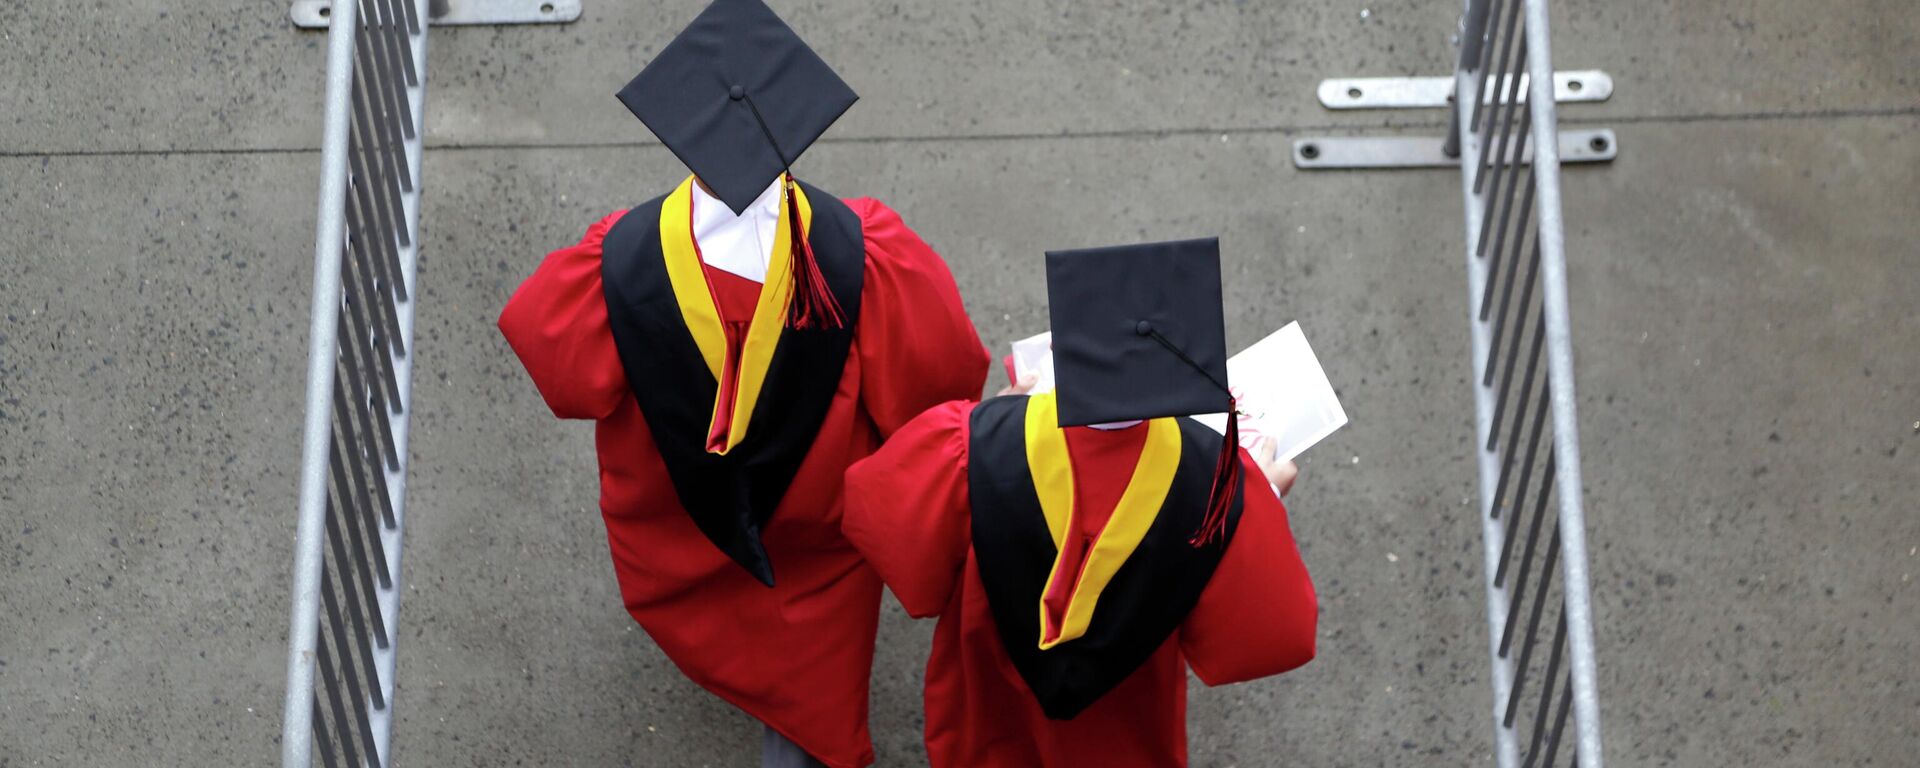 FILE - New graduates walk into the High Point Solutions Stadium before the start of the Rutgers University graduation ceremony in Piscataway Township, N.J., on May 13, 2018 - Sputnik International, 1920, 28.09.2022